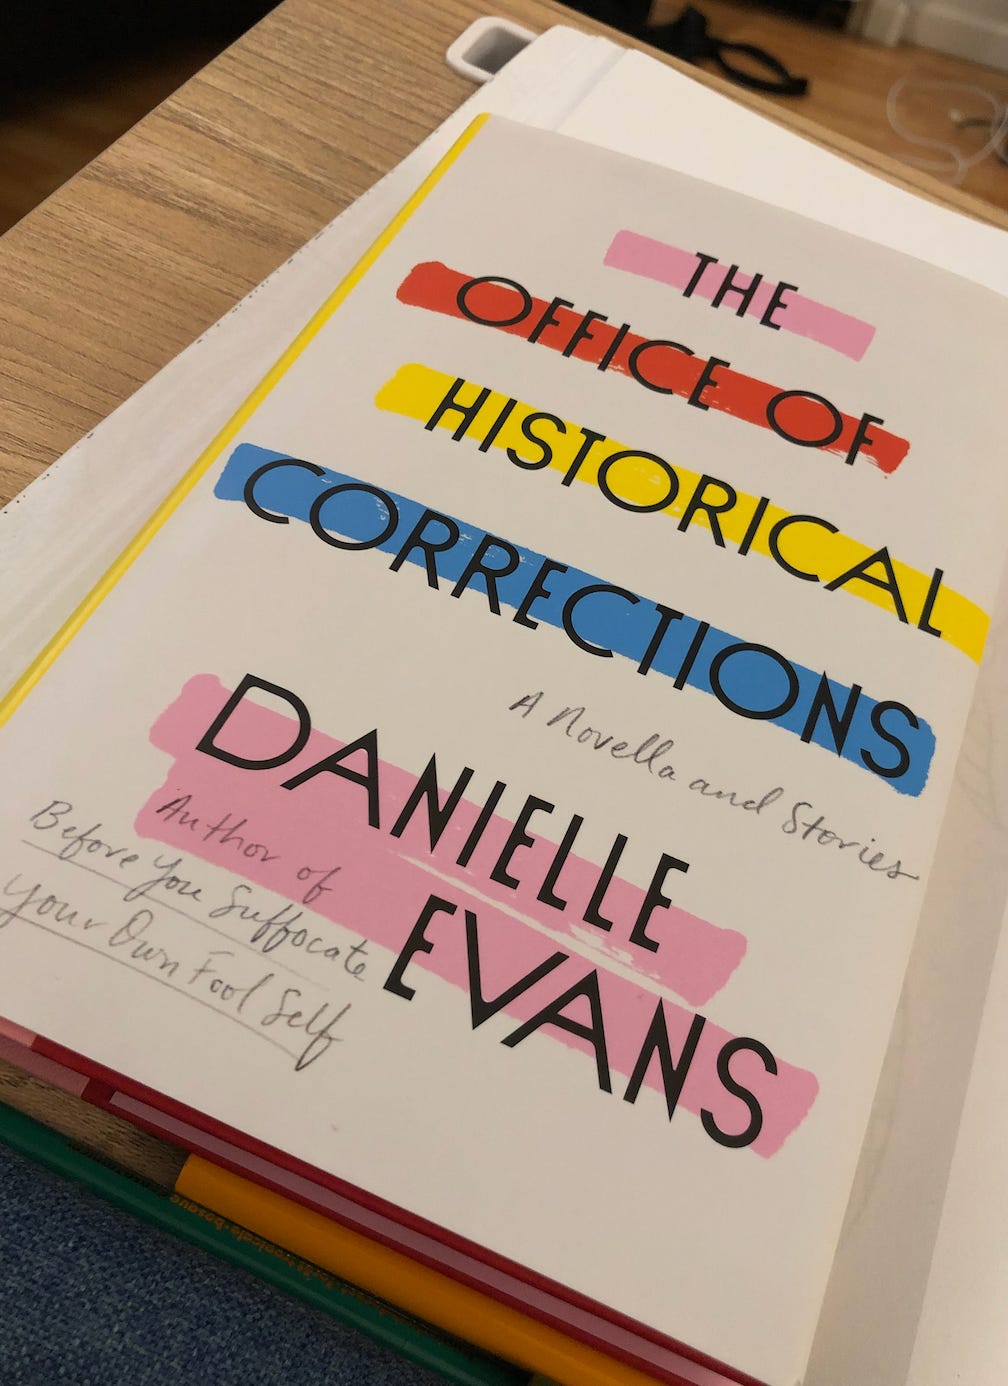 A photo of Kat’s copy of The Office of Historical Corrections by Danielle Evans. The cover is abstract with warm-colored horizontal lines dashing across it.